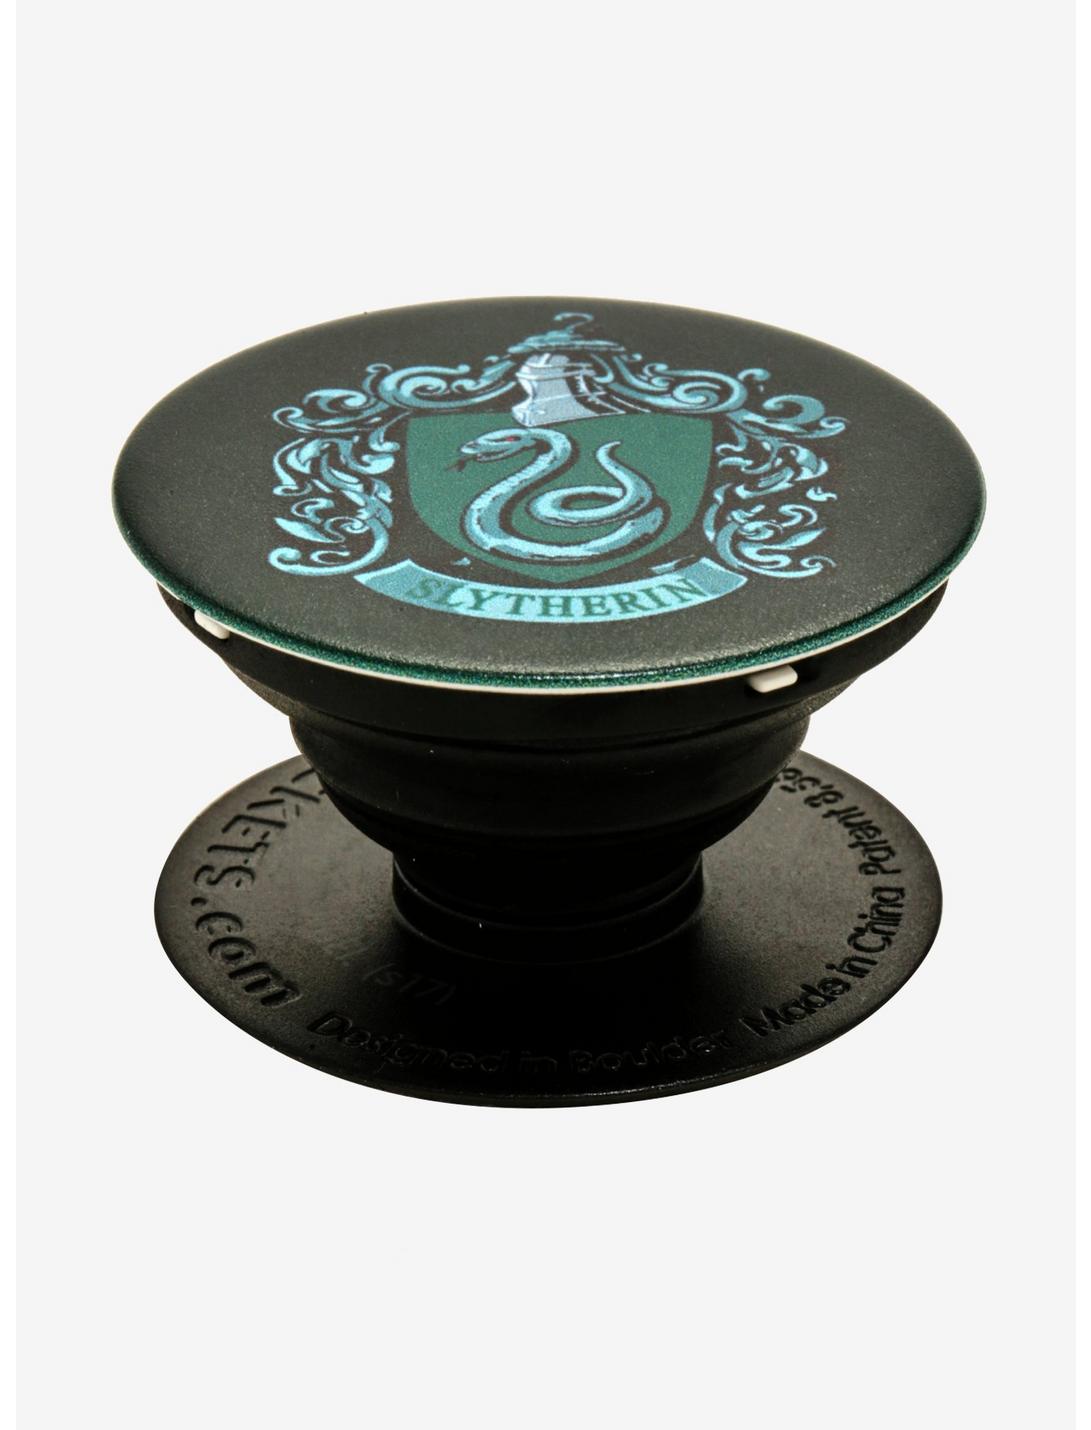 PopSockets Harry Potter Slytherin Phone Grip And Stand, , hi-res